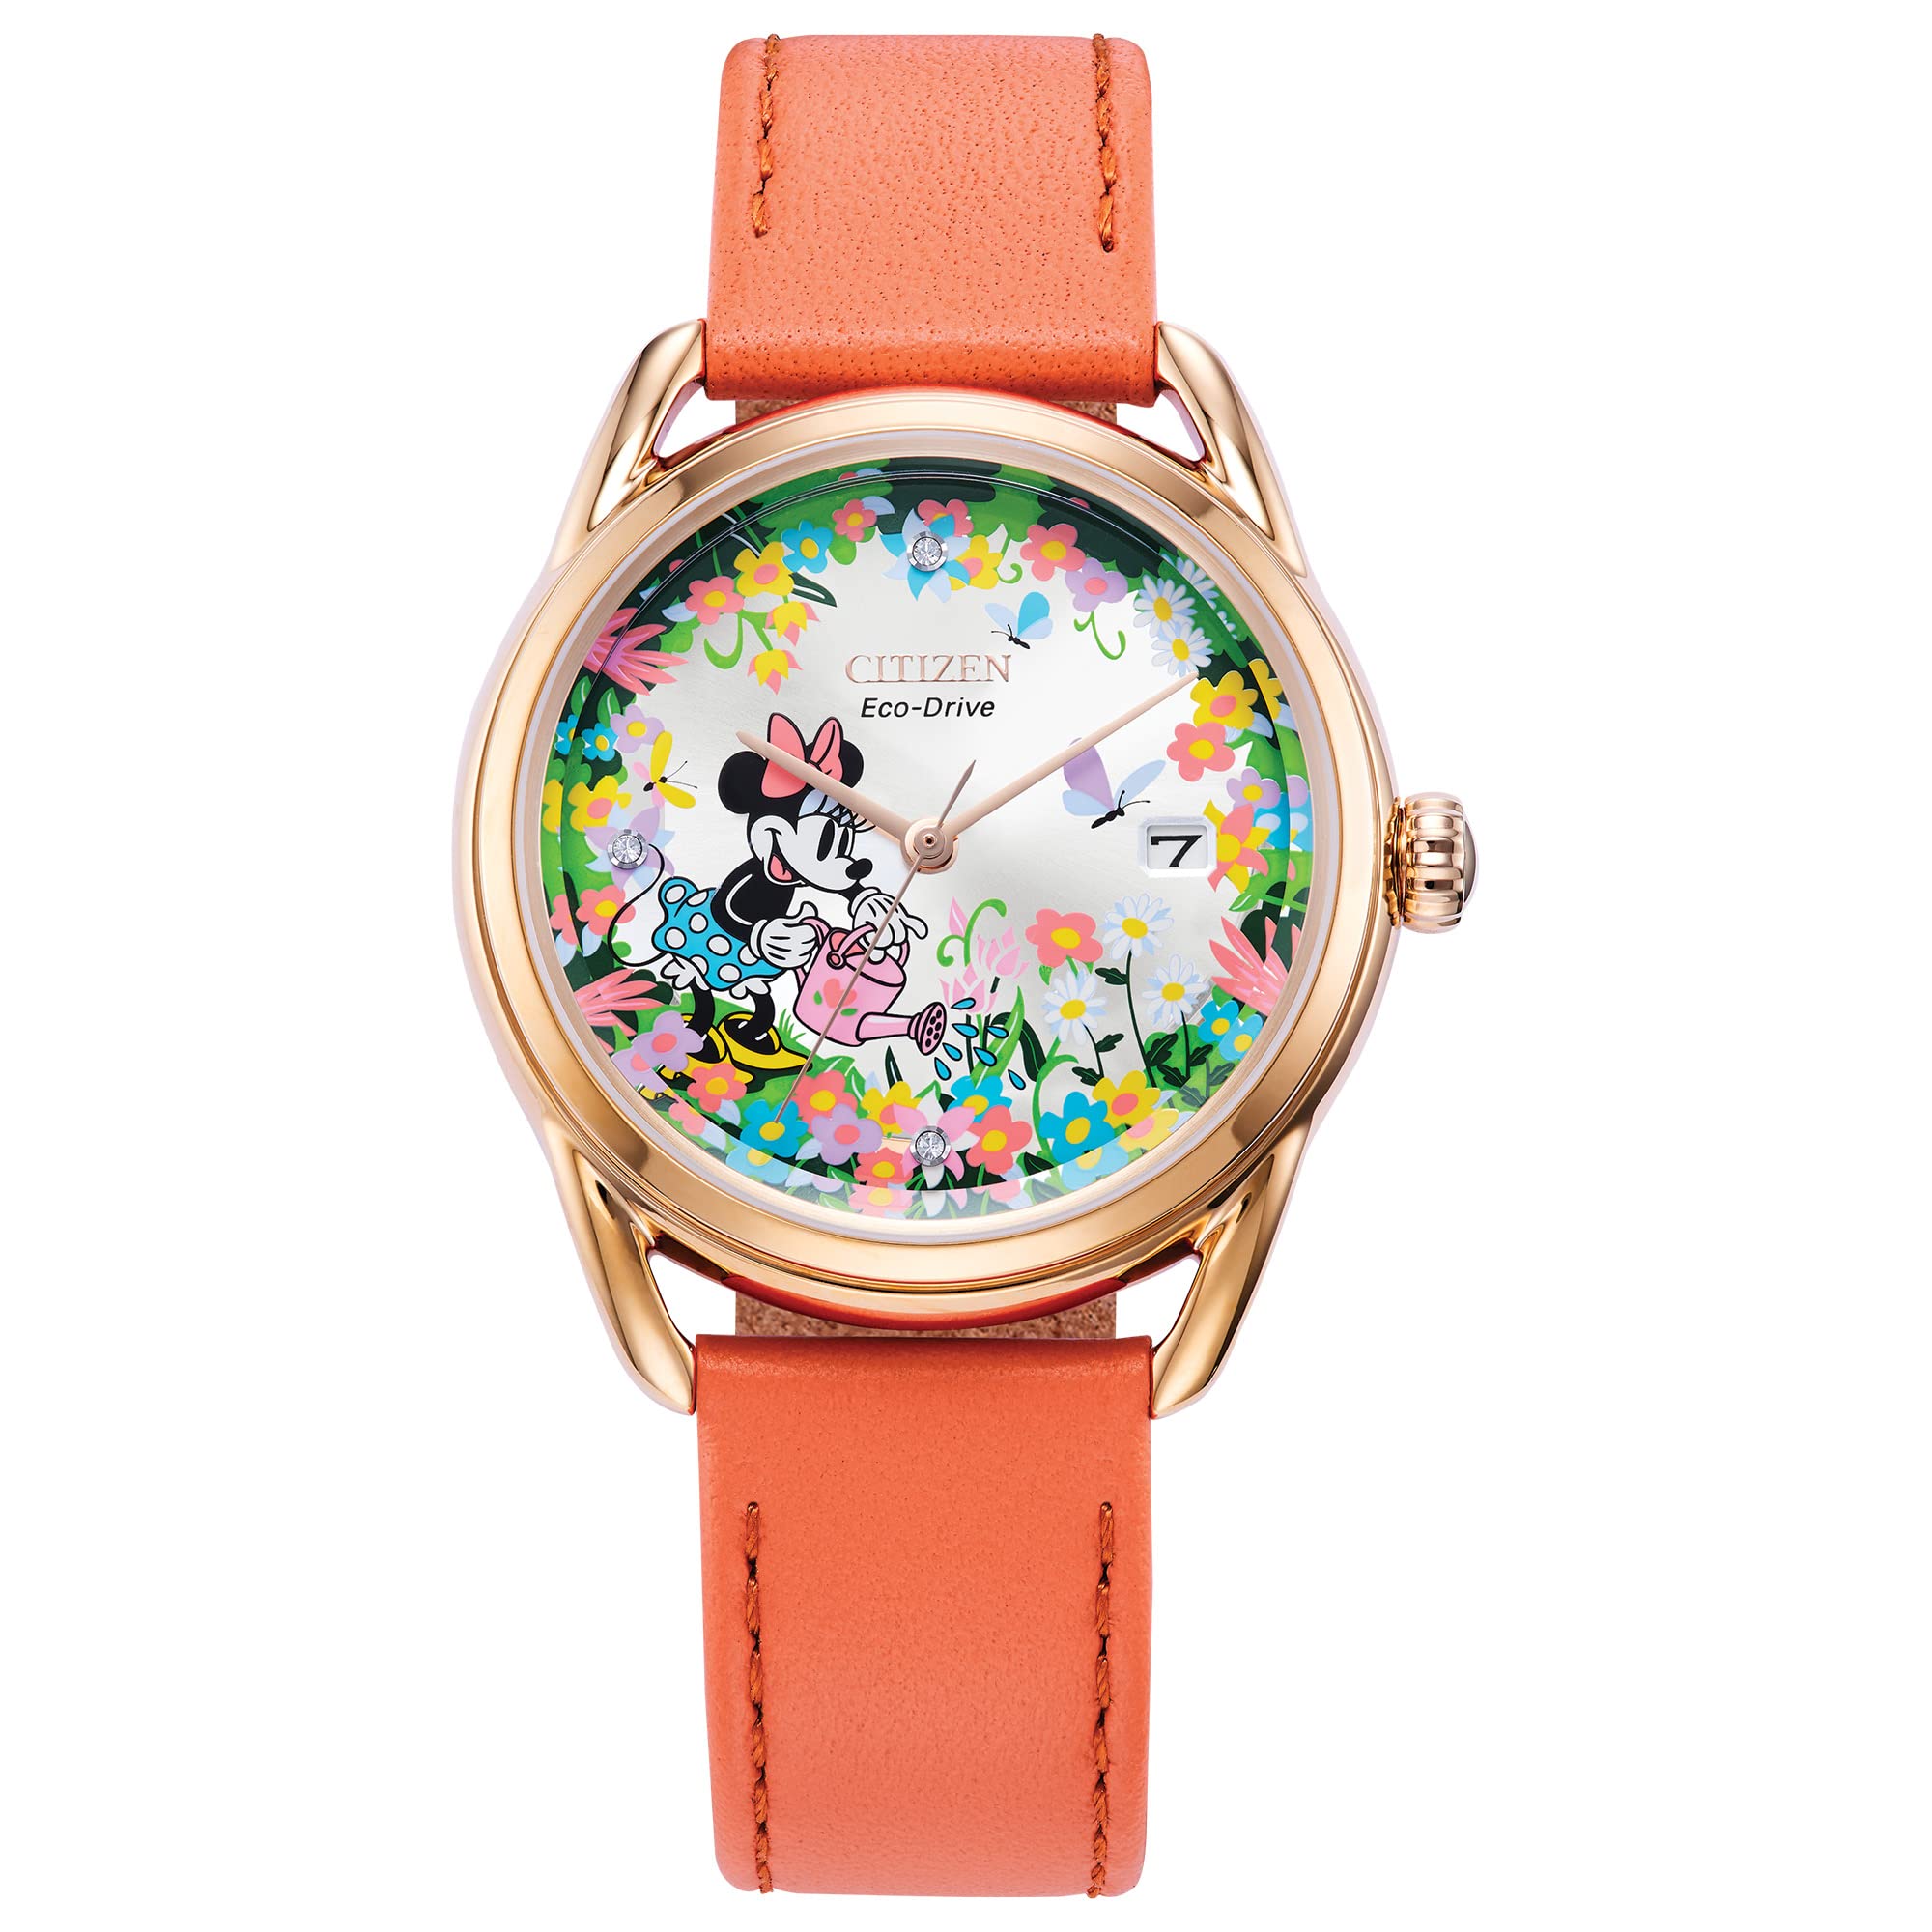 Citizen Eco-Drive Ladies' Disney Minnie Mouse Gardening Watch, Gold Tone with Coral Strap, Floral, 3-Hand Date, 36mm (Model: FE6087-04W)